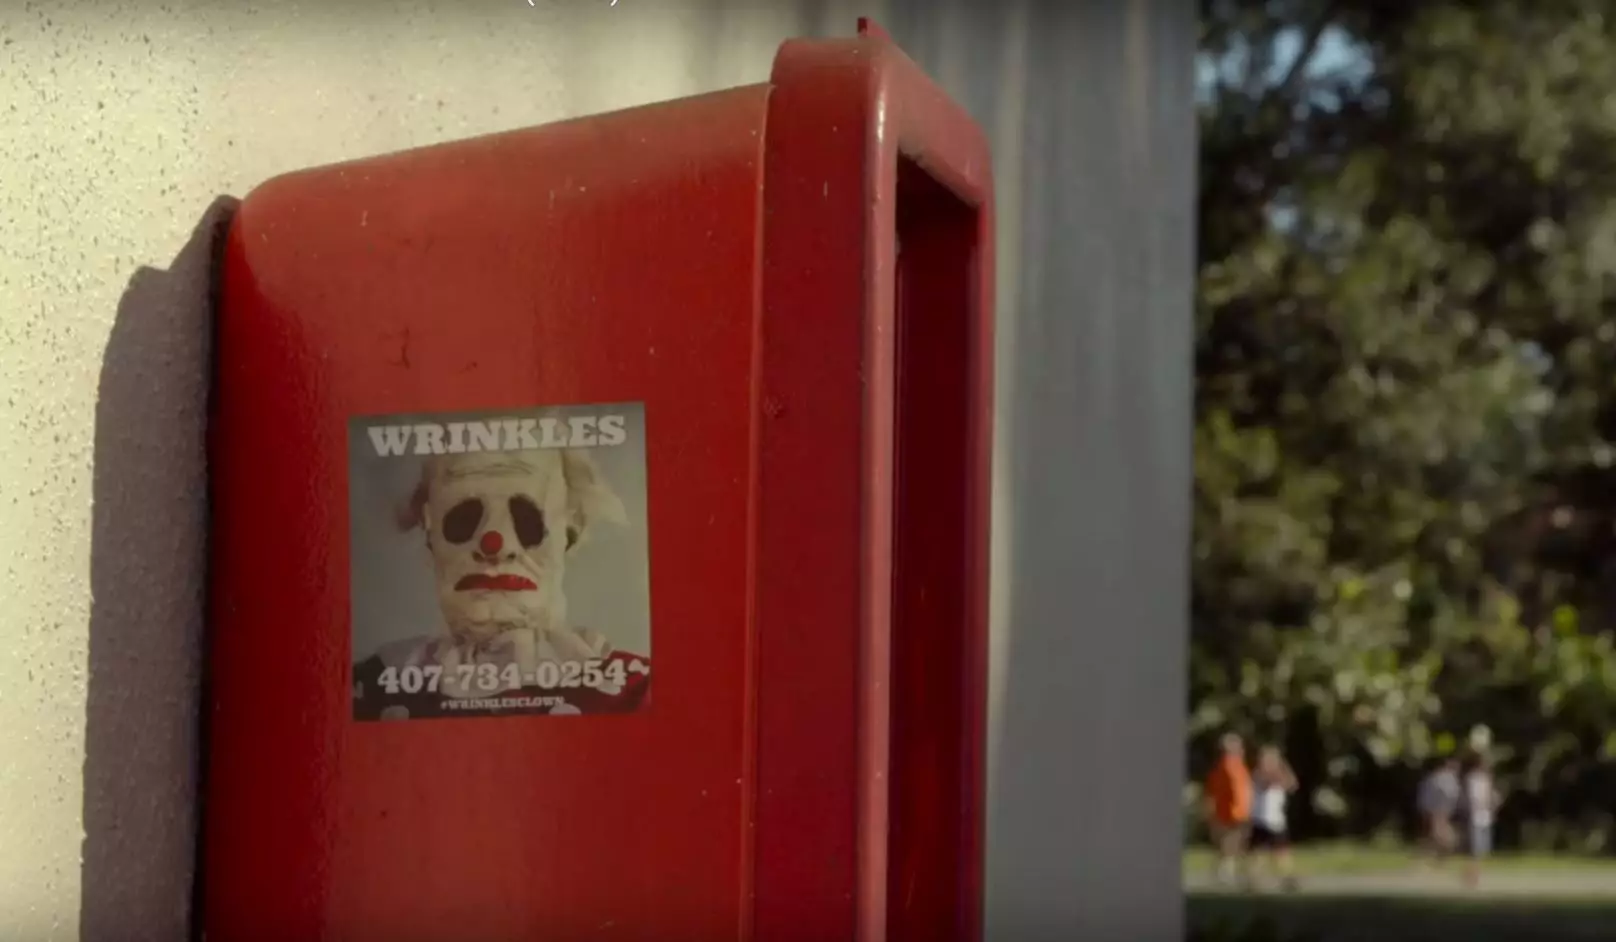 Wrinkles The Clown Is About A YouTuber Paid To Scare Children Is Utterly Terrifying.